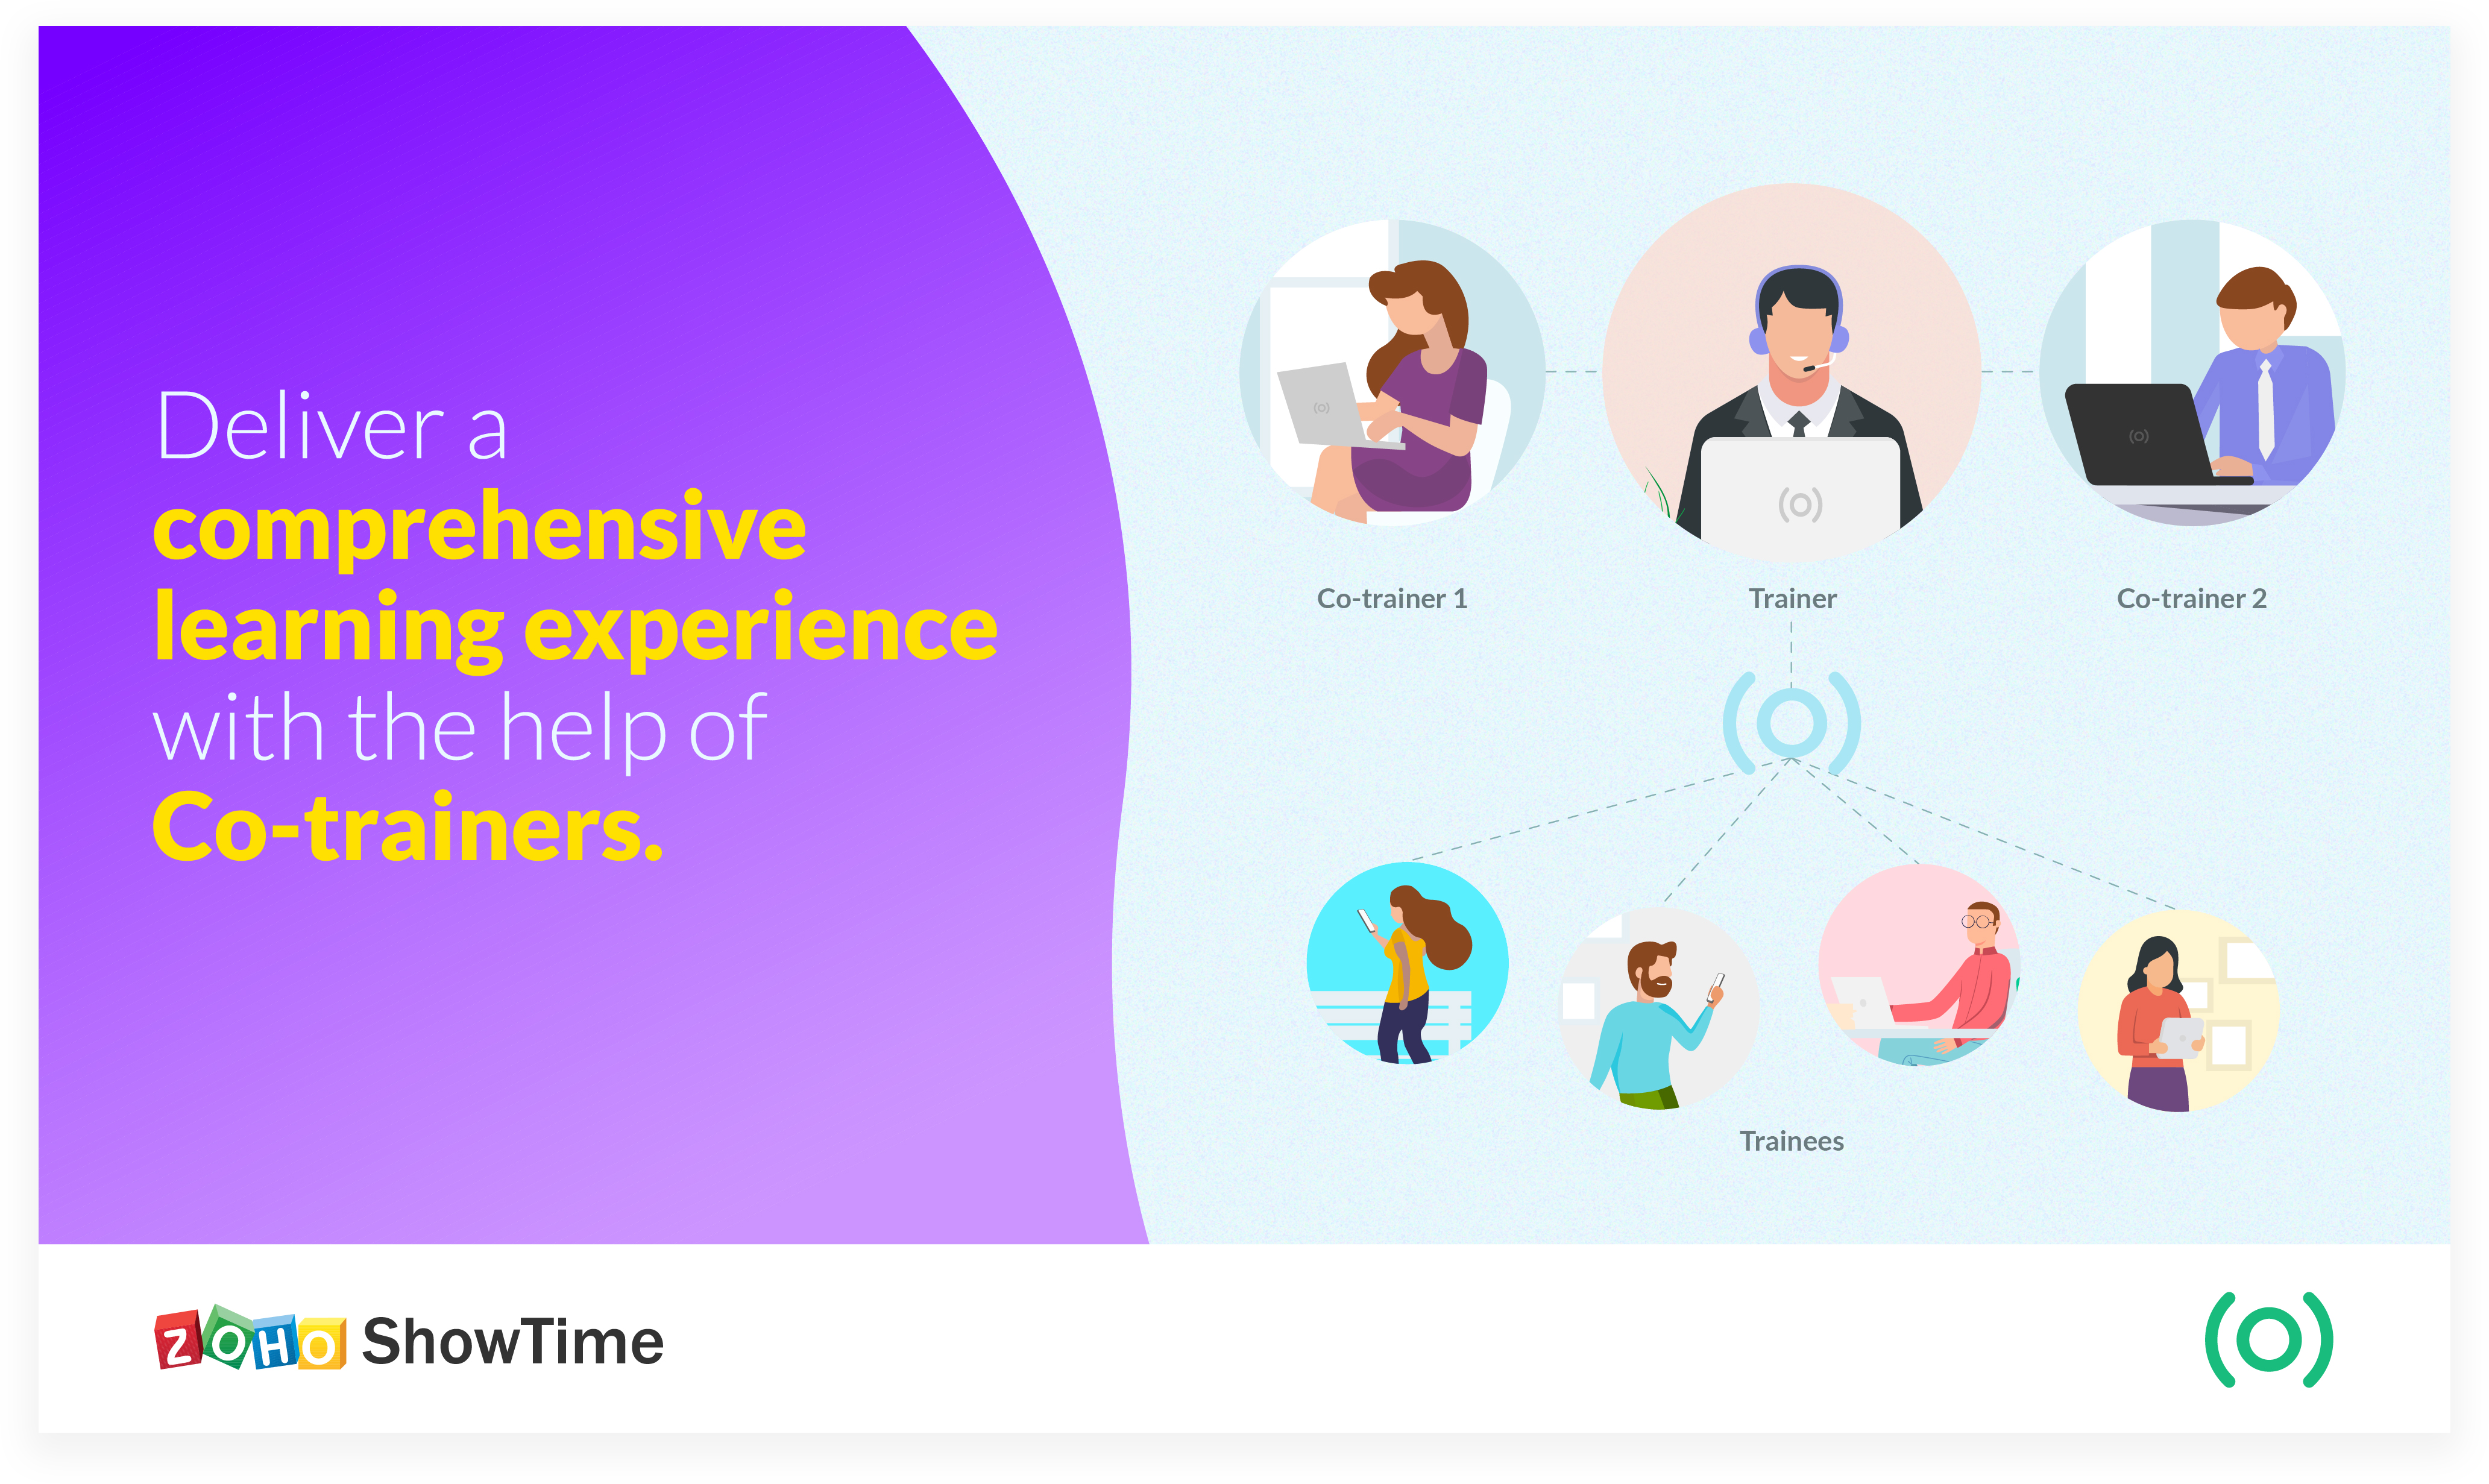 Introducing Co-trainer in Zoho ShowTime: Add more expertise to your training